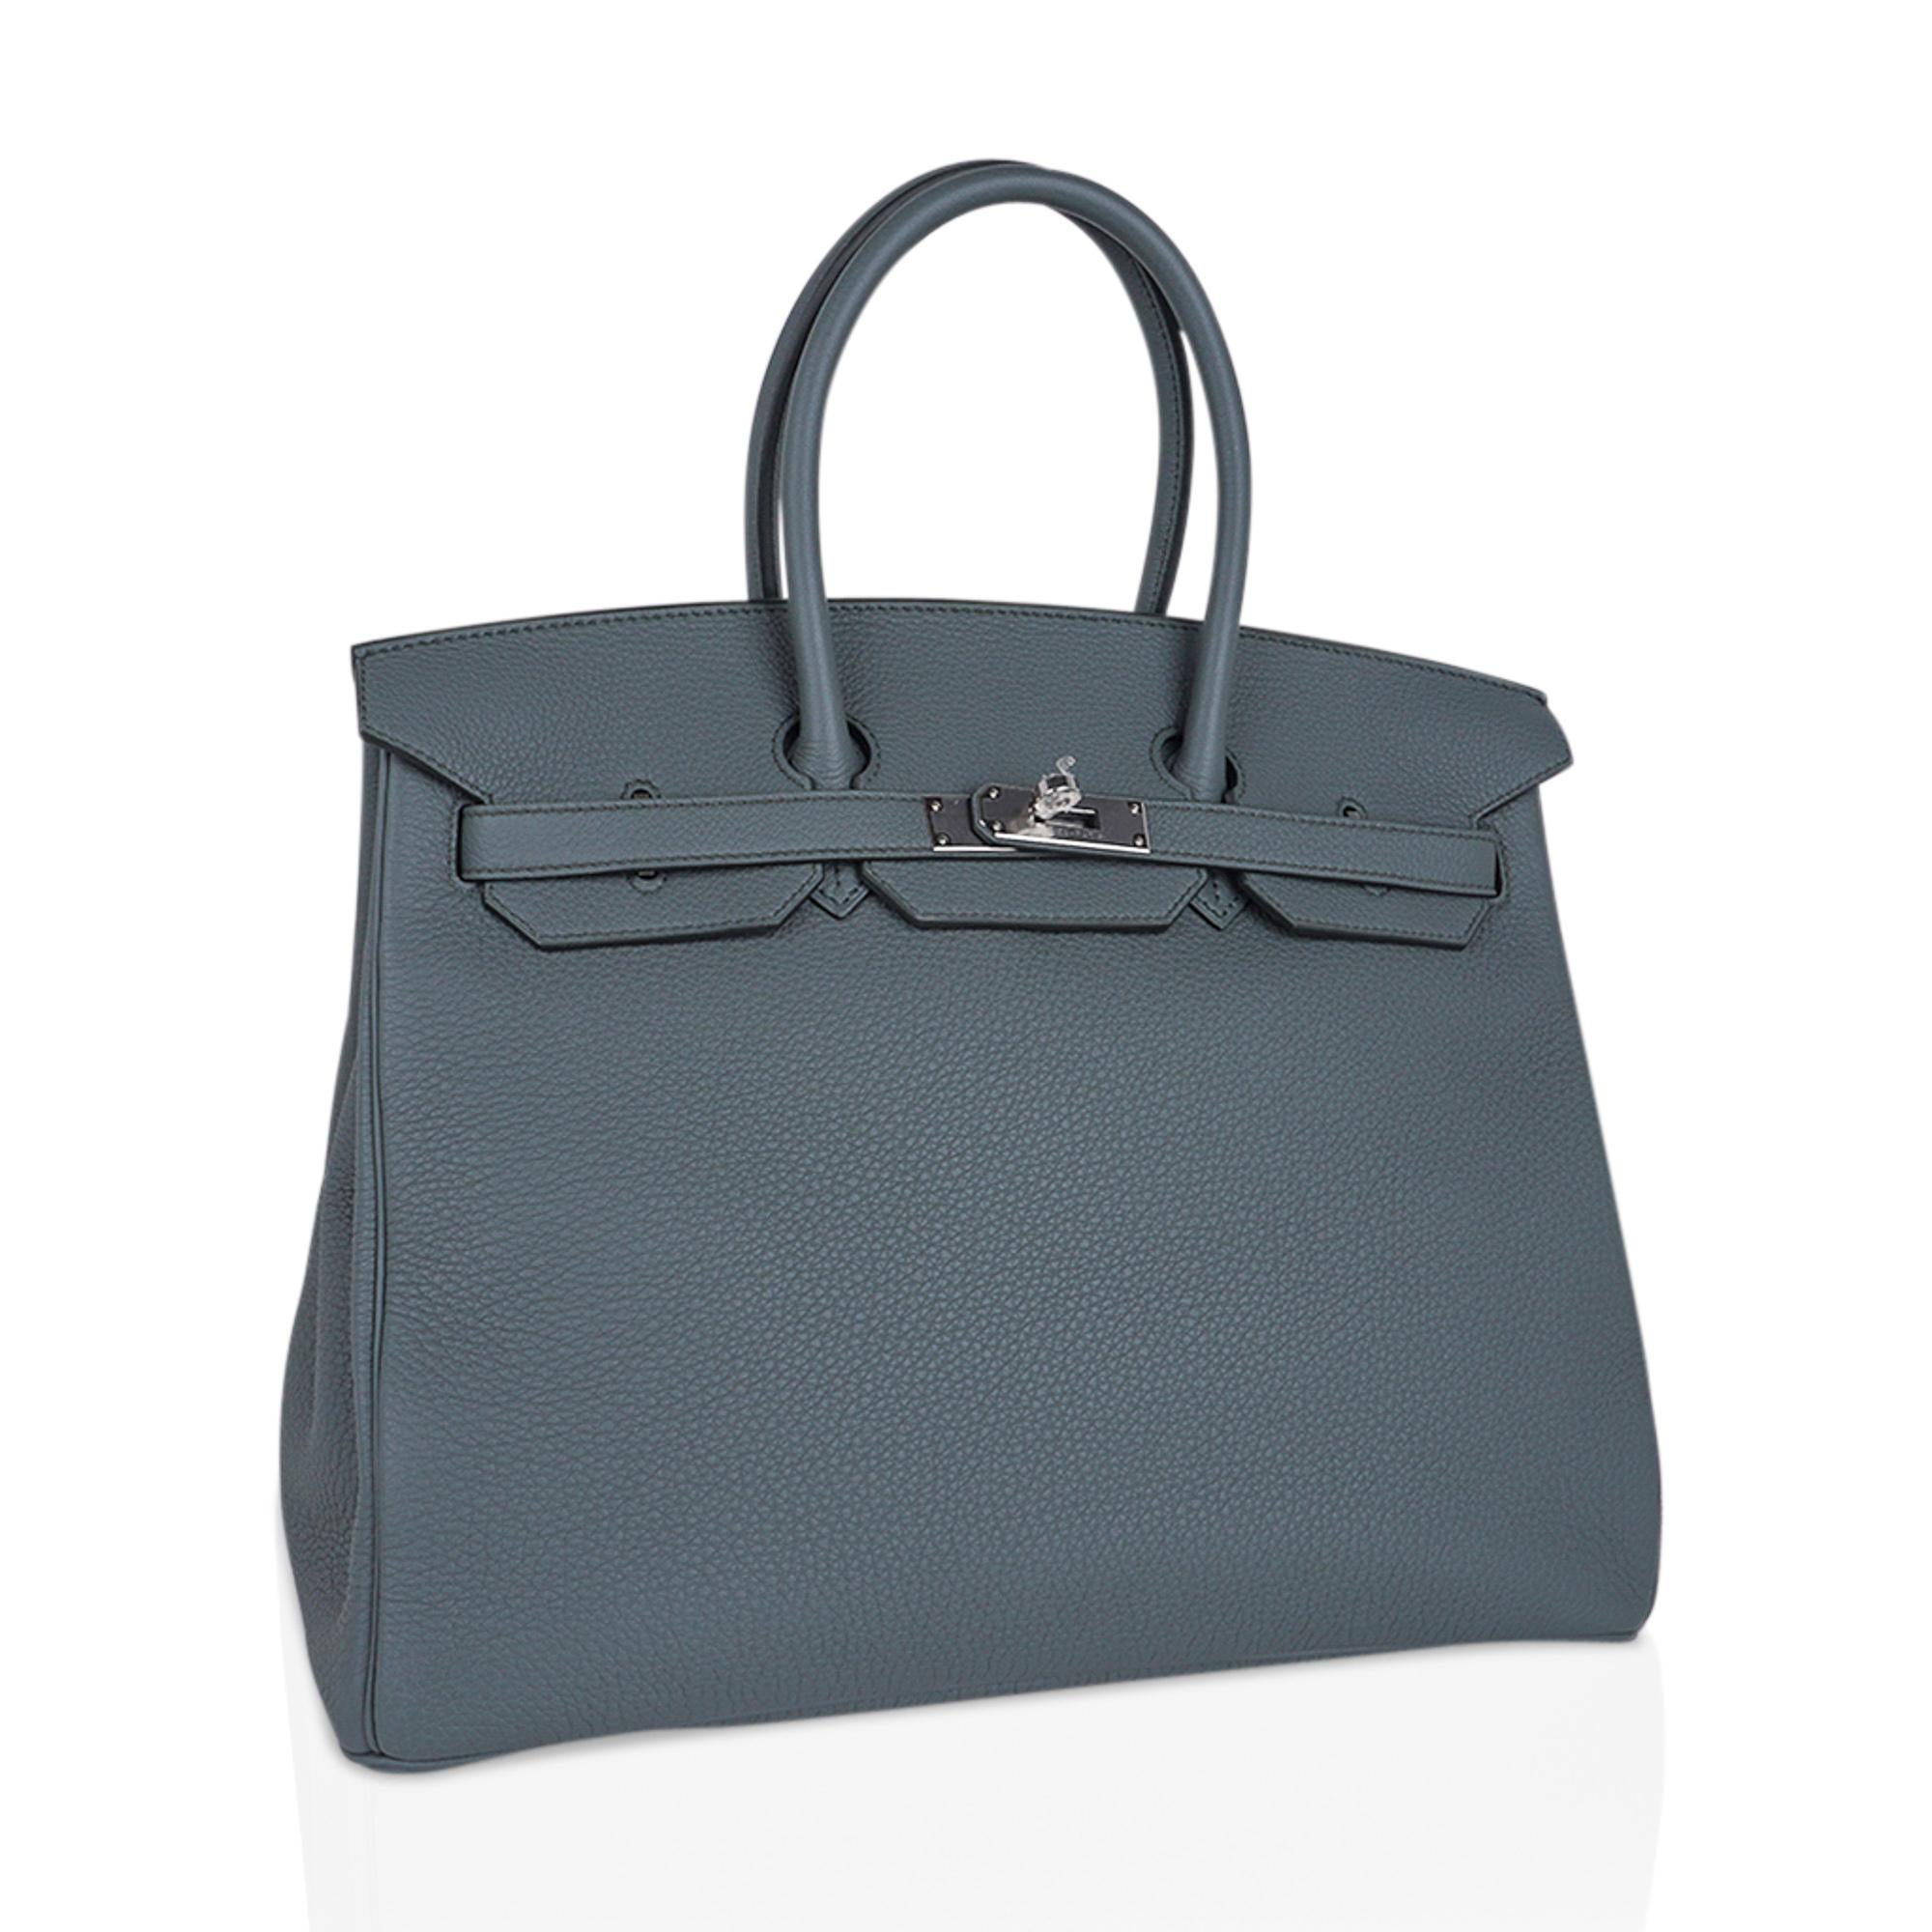 Mightychic offers an Hermes Birkin 35 bag featured in gorgeous Vert Amande.
A beautiful muted green-gray-tone makes this a fabulous neutral Birkin bag.
Fresh with palladium hardware.
Togo leather is textured and resistant to scratches.
Comes with